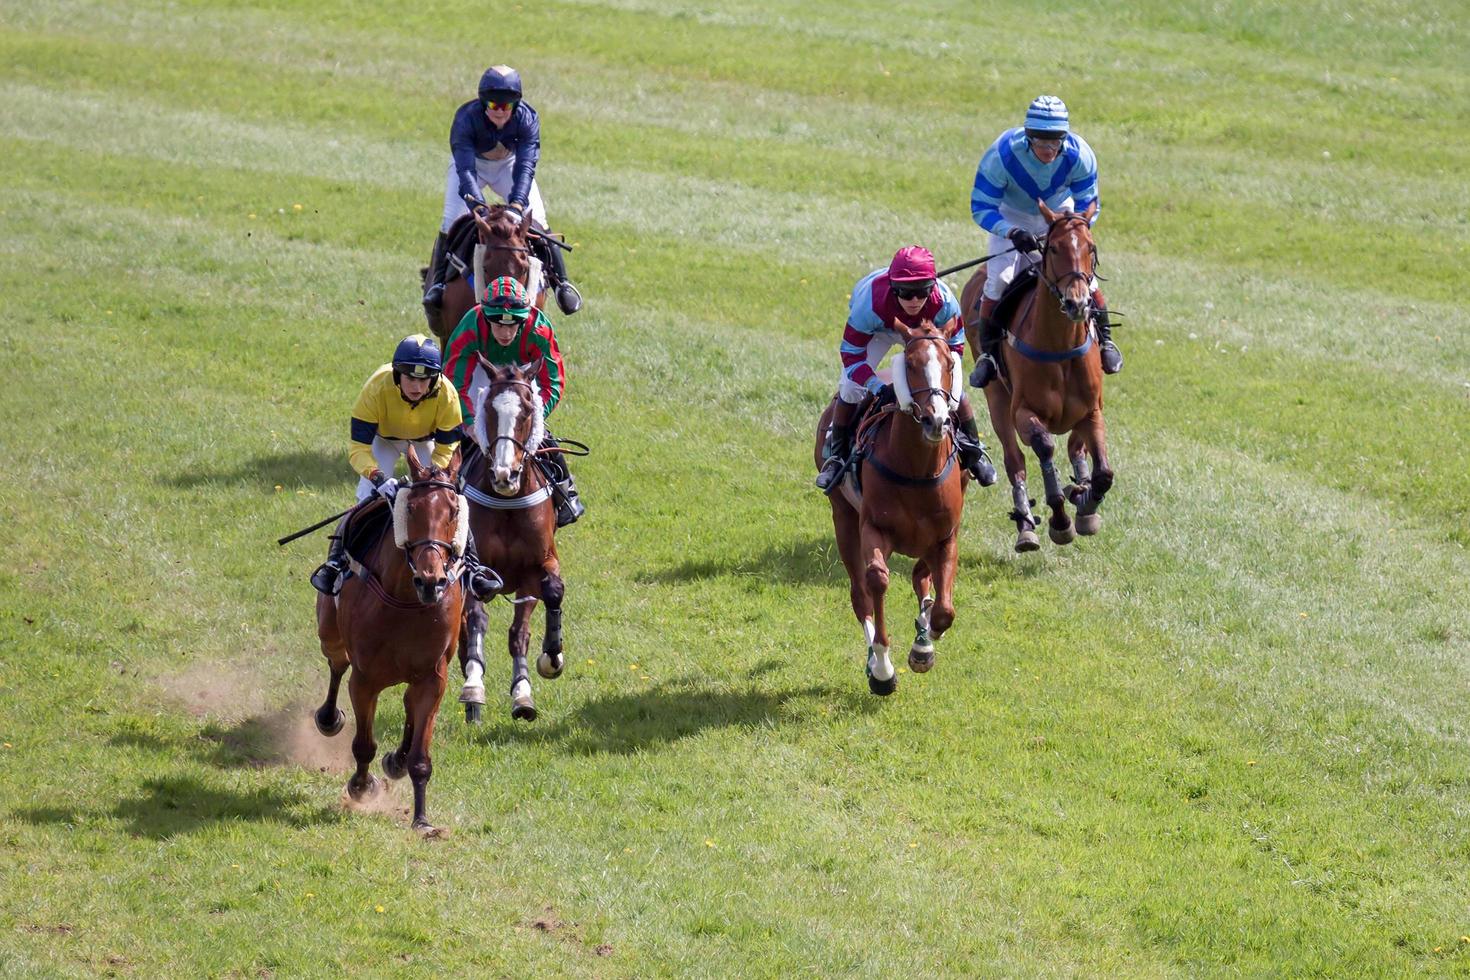 Point to point racing at Godstone Surrey on May 2, 2009. Unidentified people photo